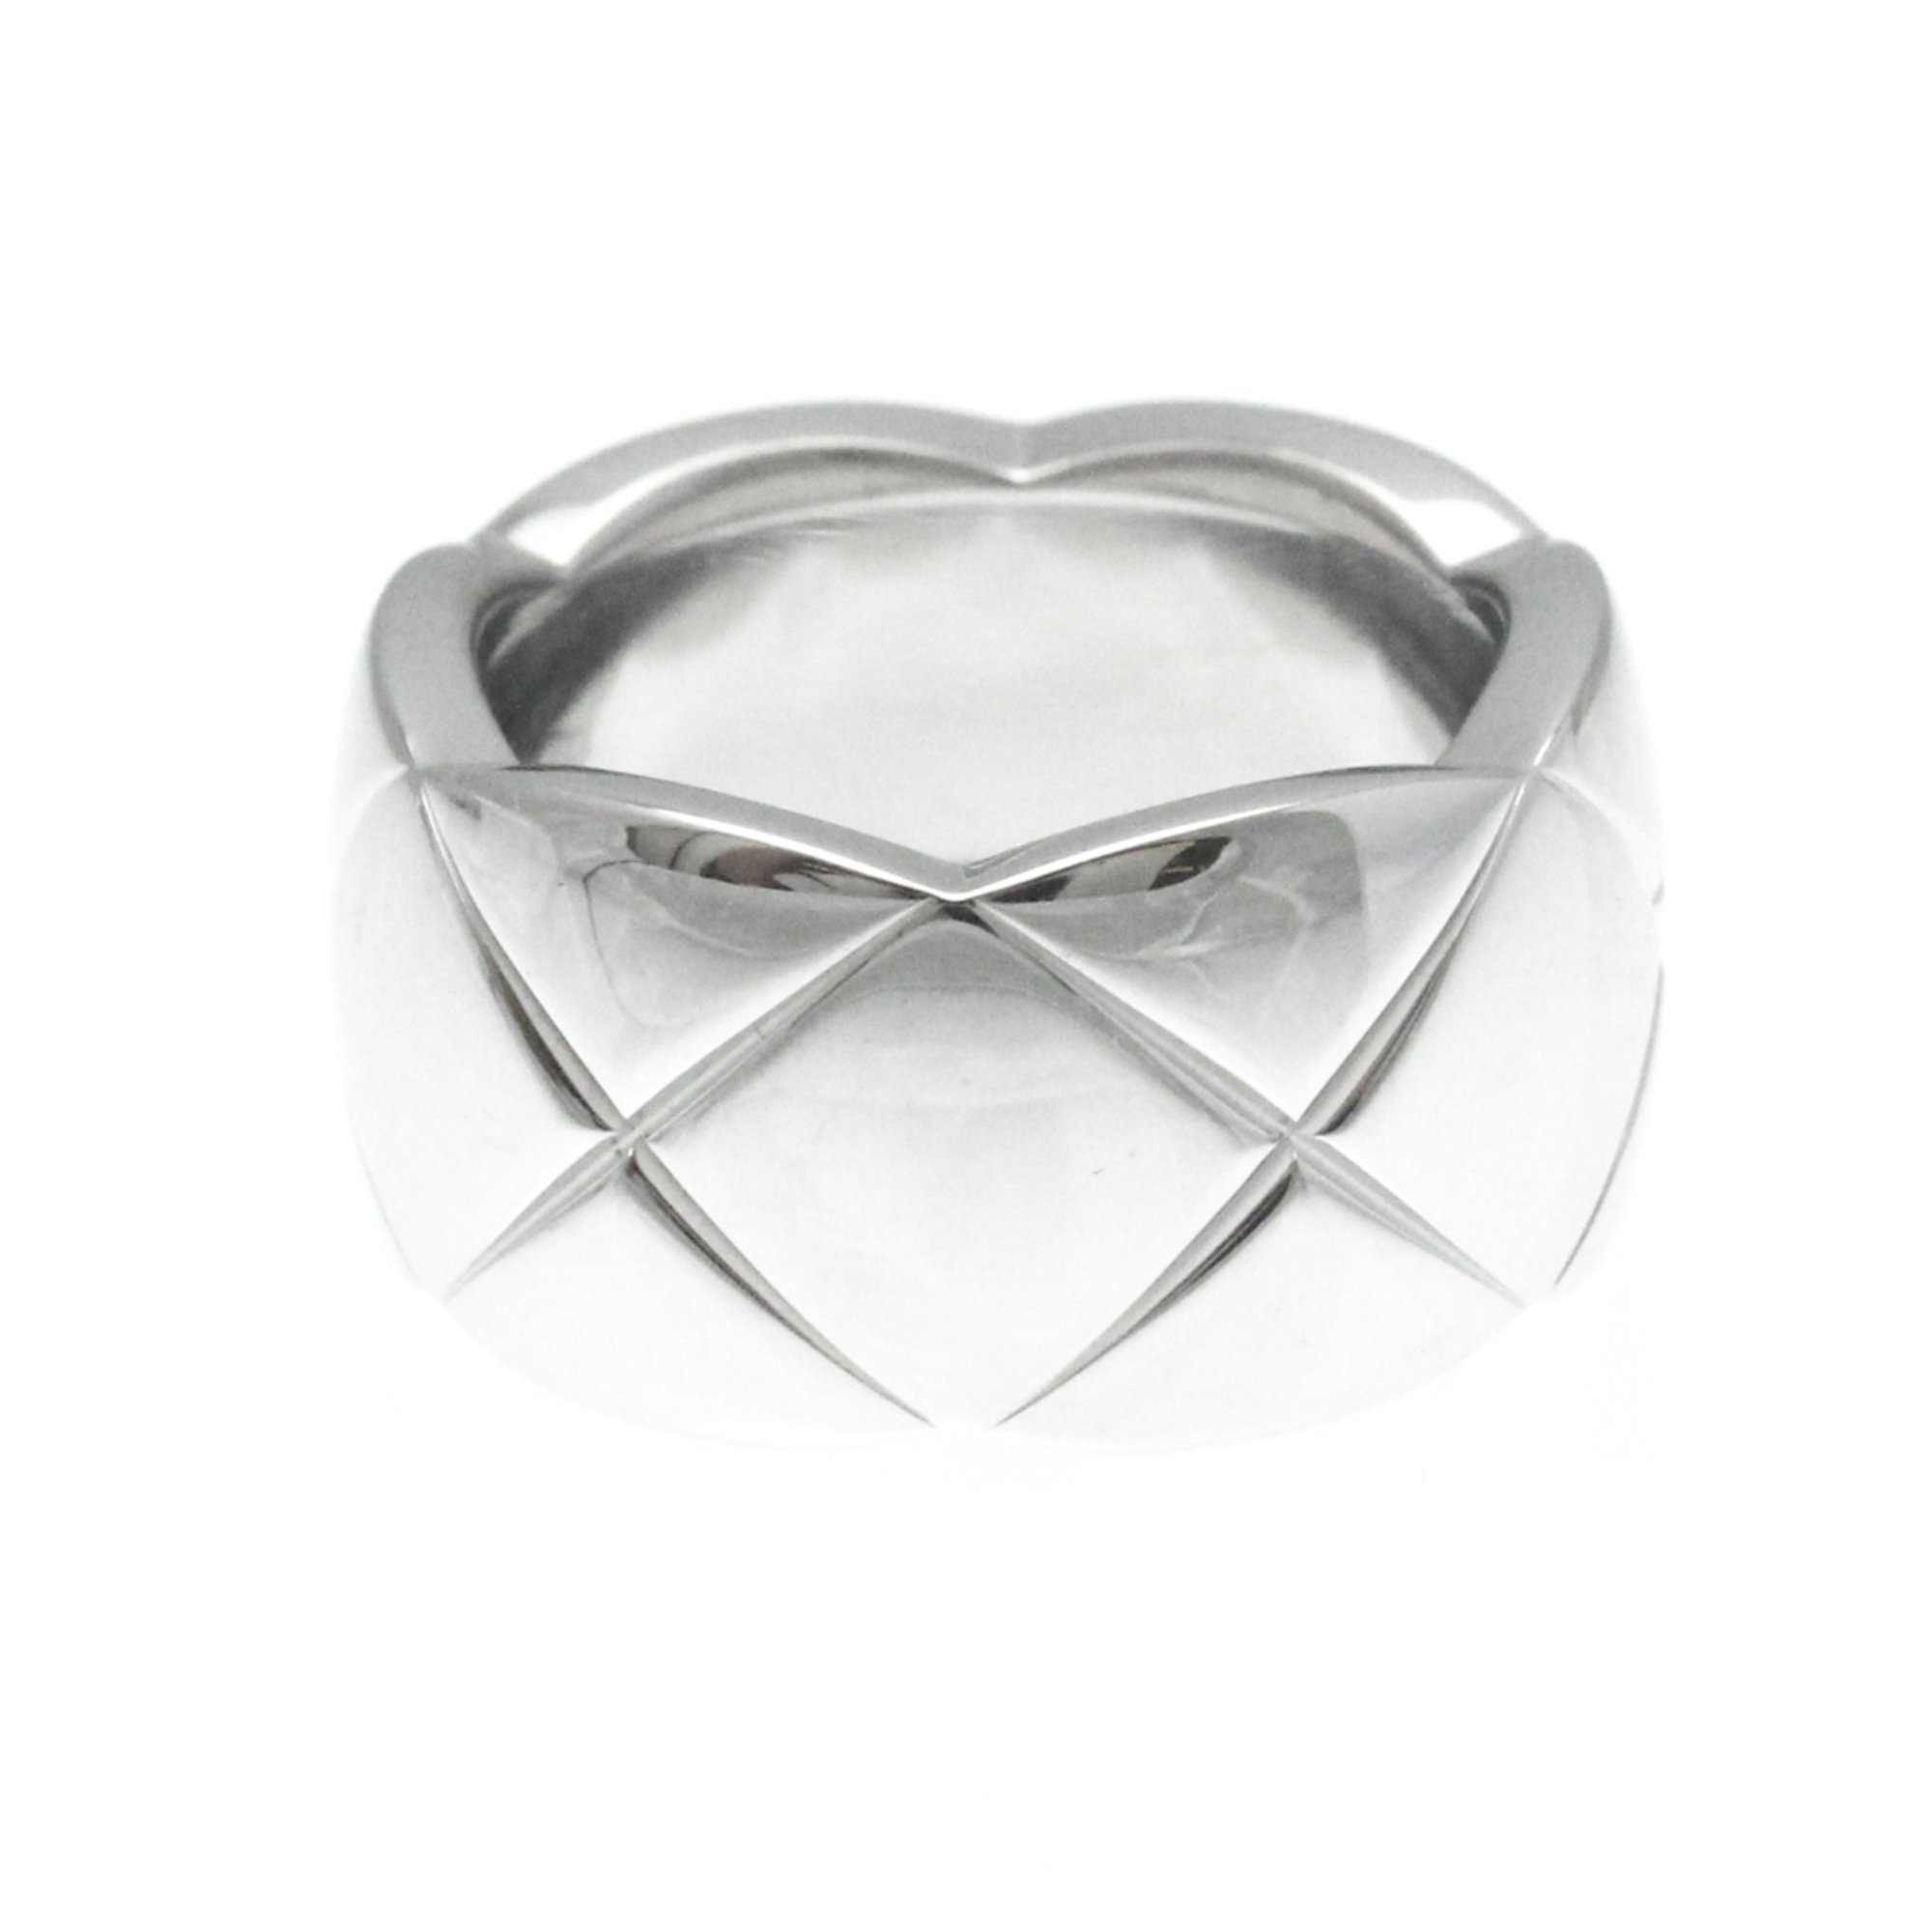 Chanel Coco Crush Ring Large Model White Gold (18K) Fashion No Stone Band Ring Silver